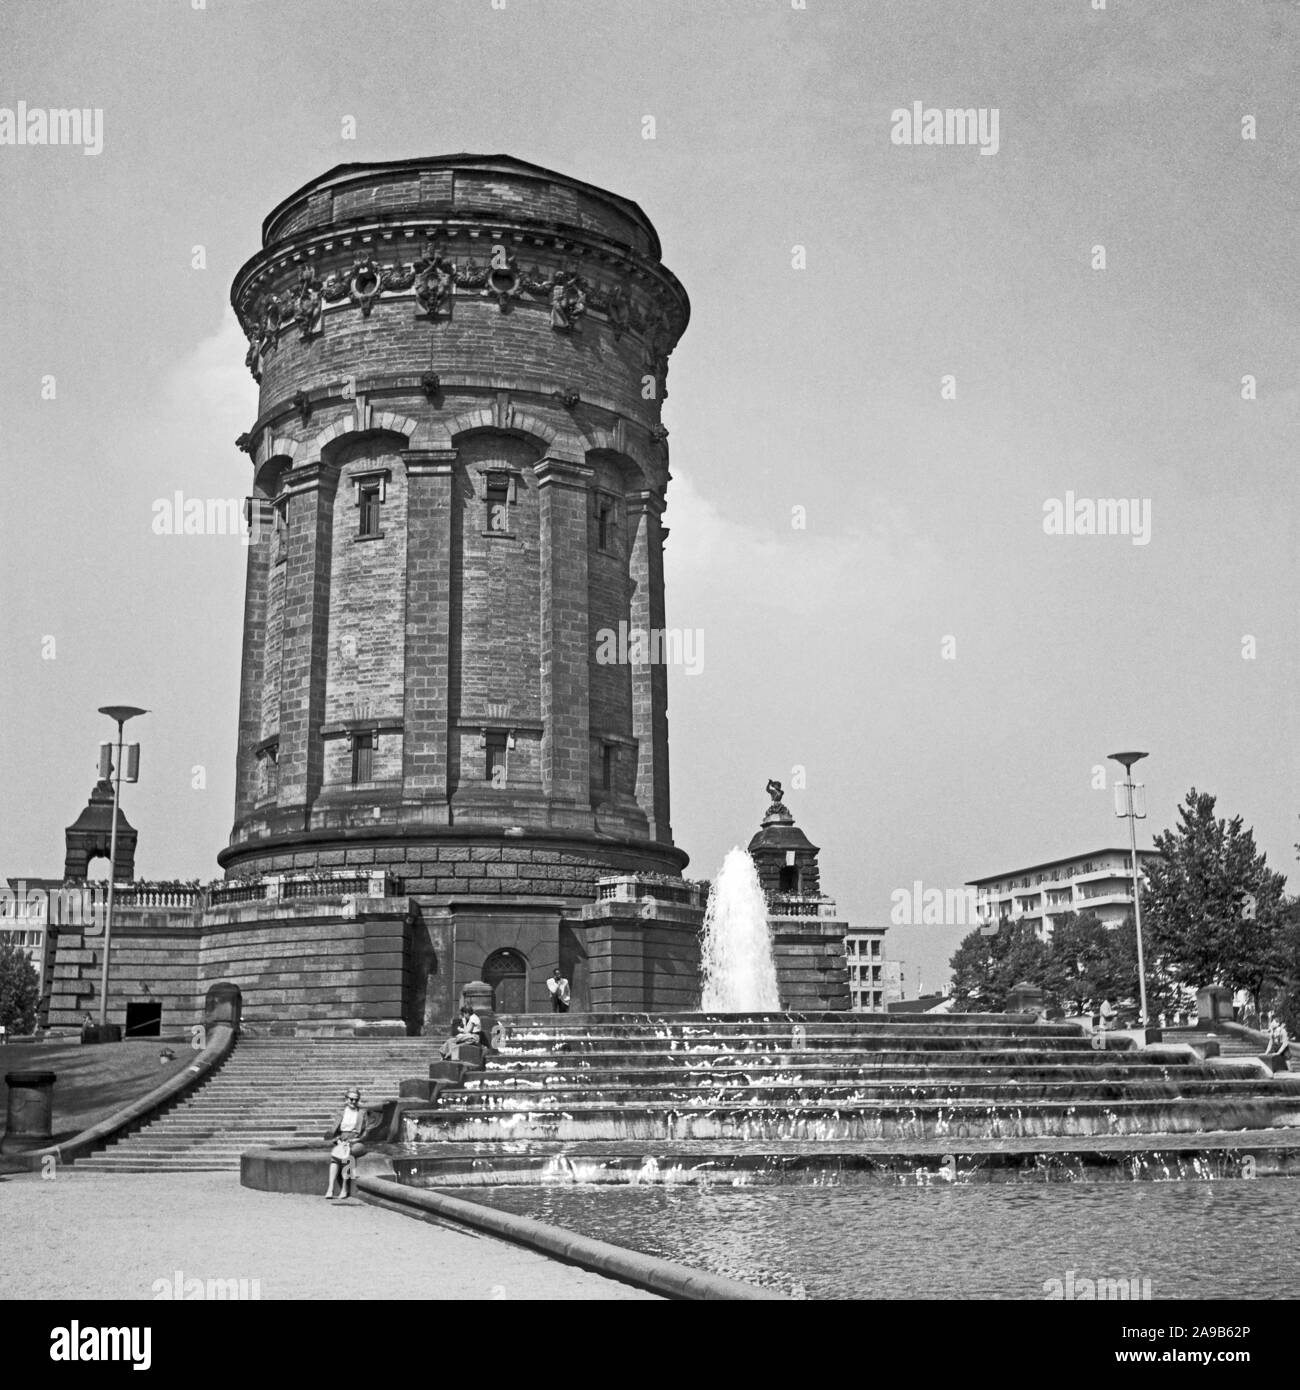 Mannheim Water Tower, Allemagne 1957 Banque D'Images